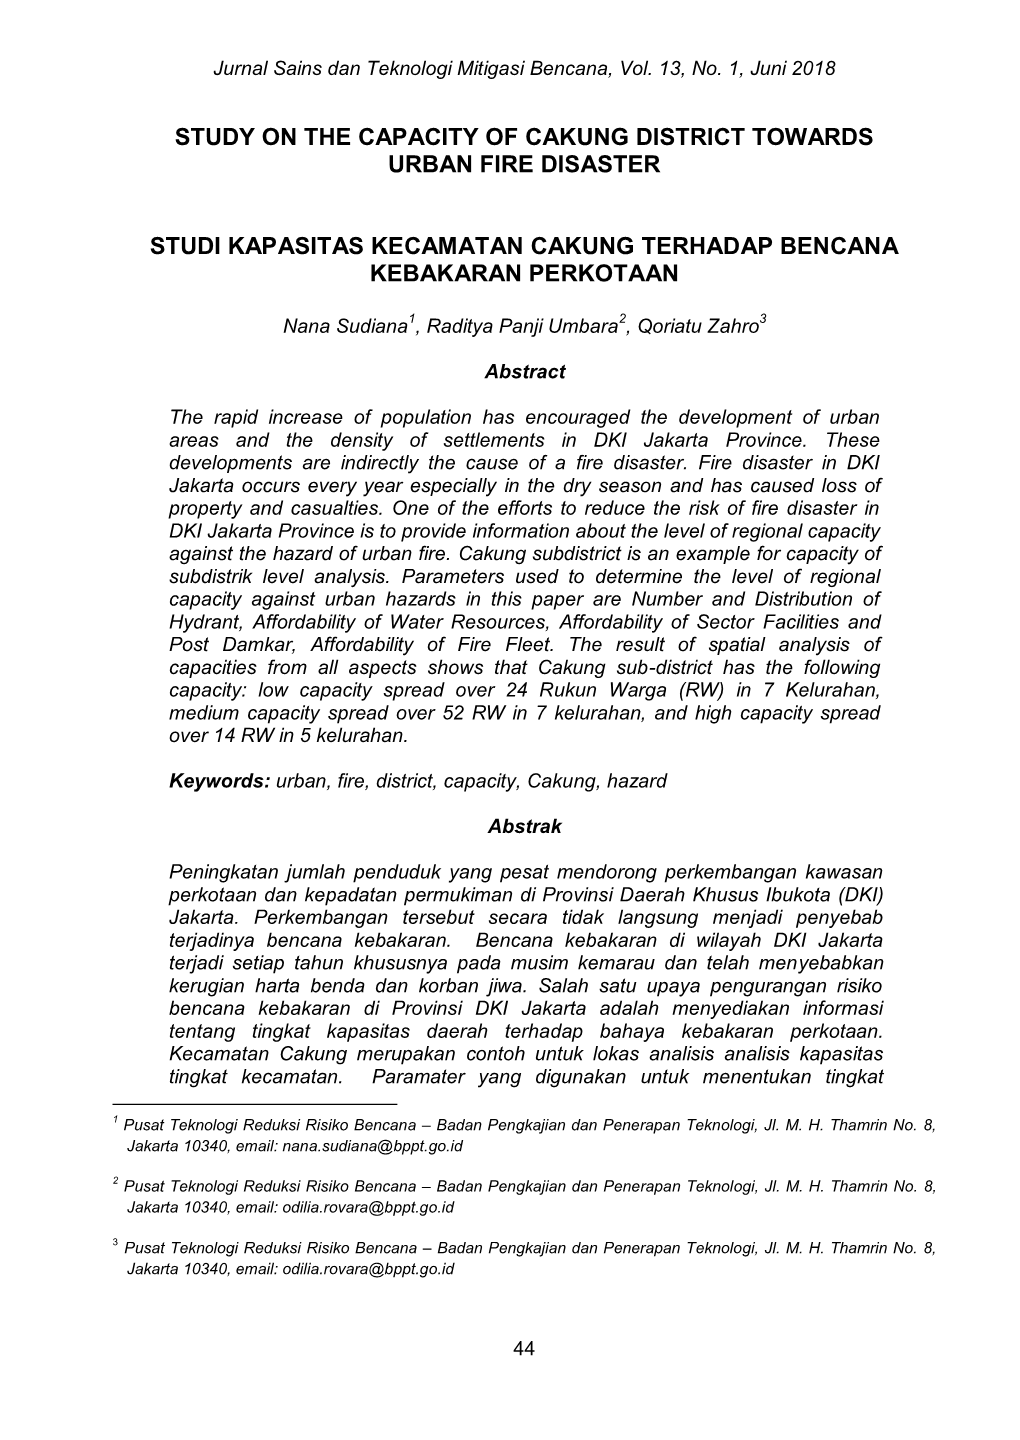 Study on the Capacity of Cakung District Towards Urban Fire Disaster